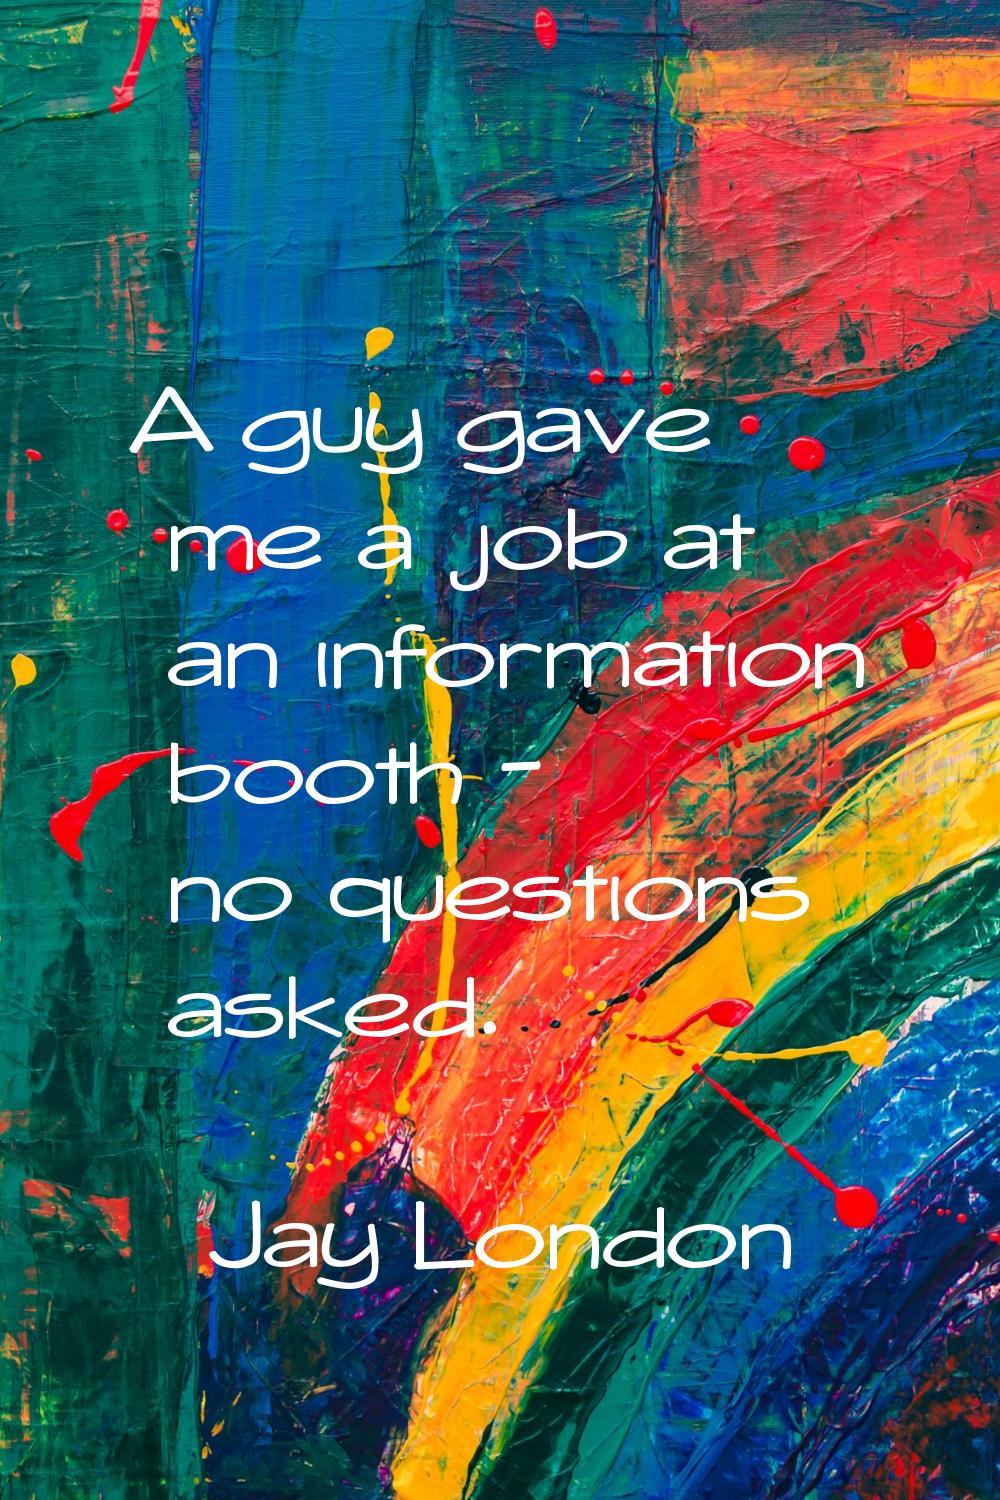 A guy gave me a job at an information booth - no questions asked.